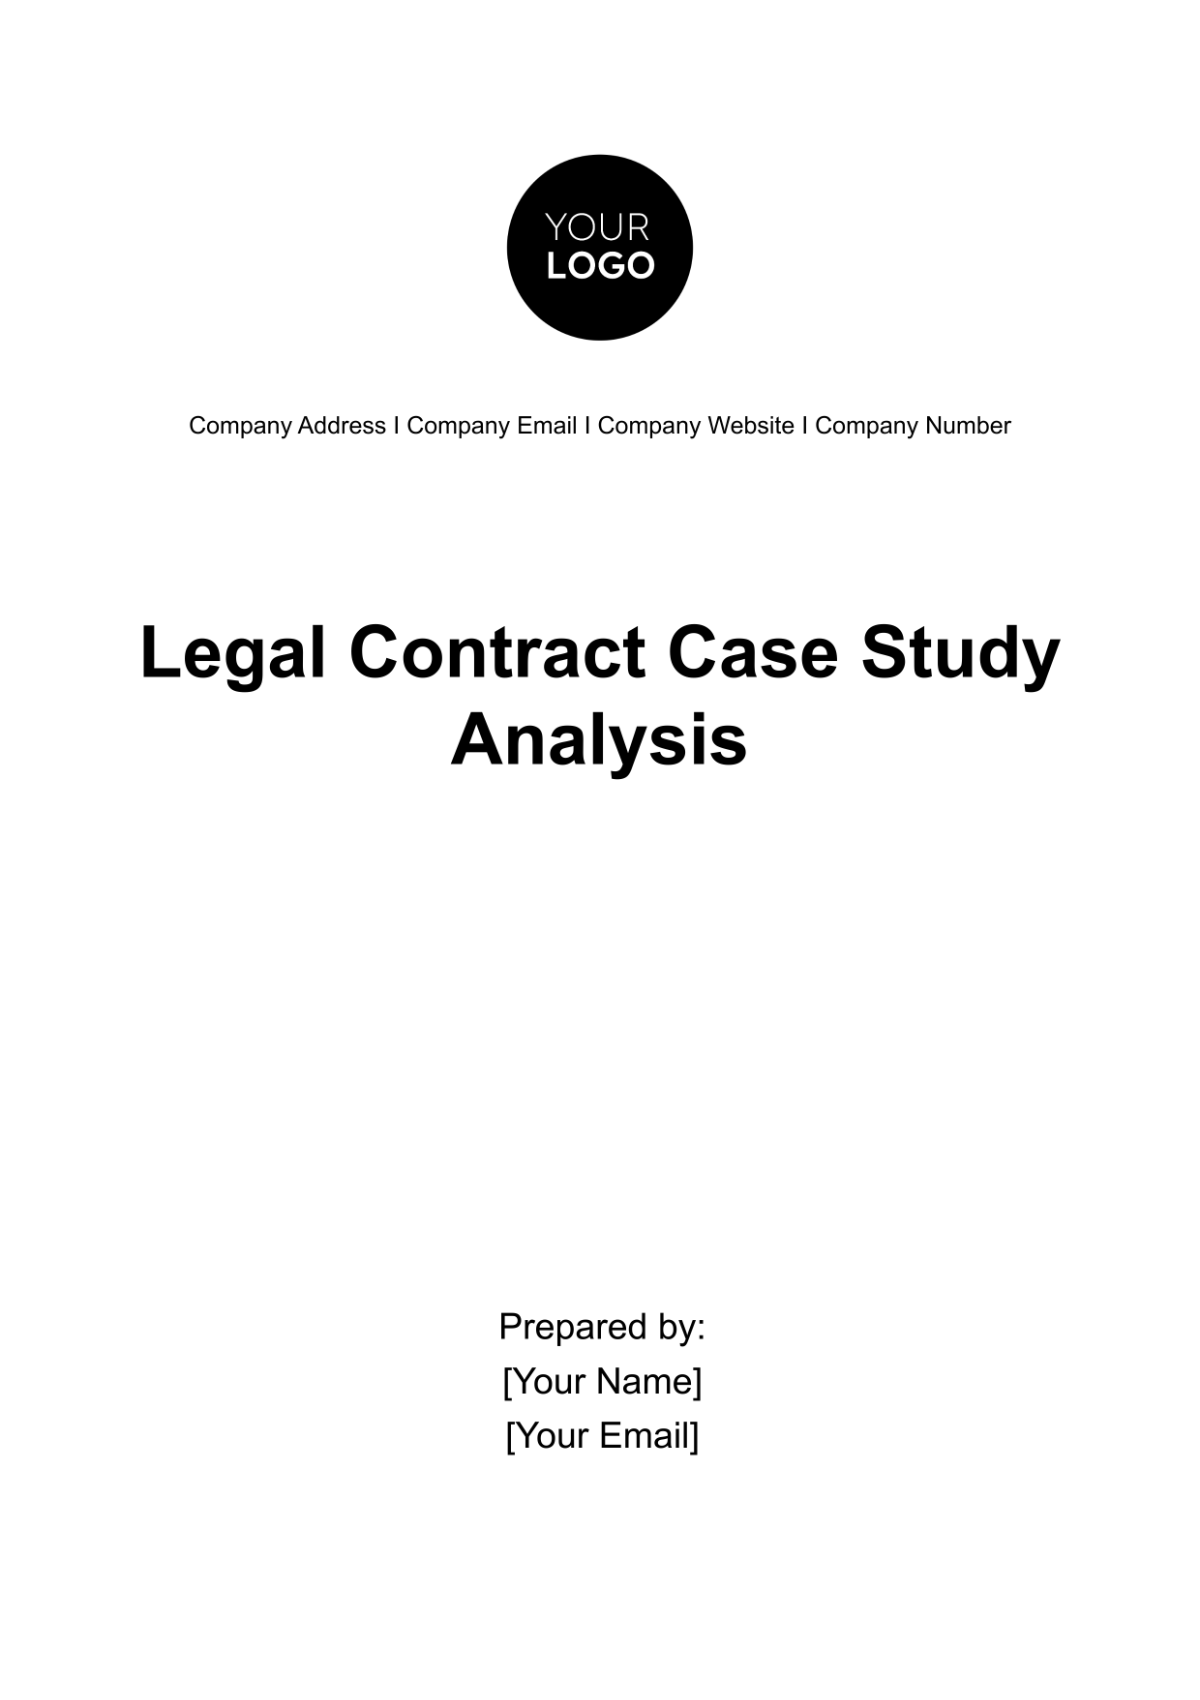 Legal Contract Case Study Analysis Template